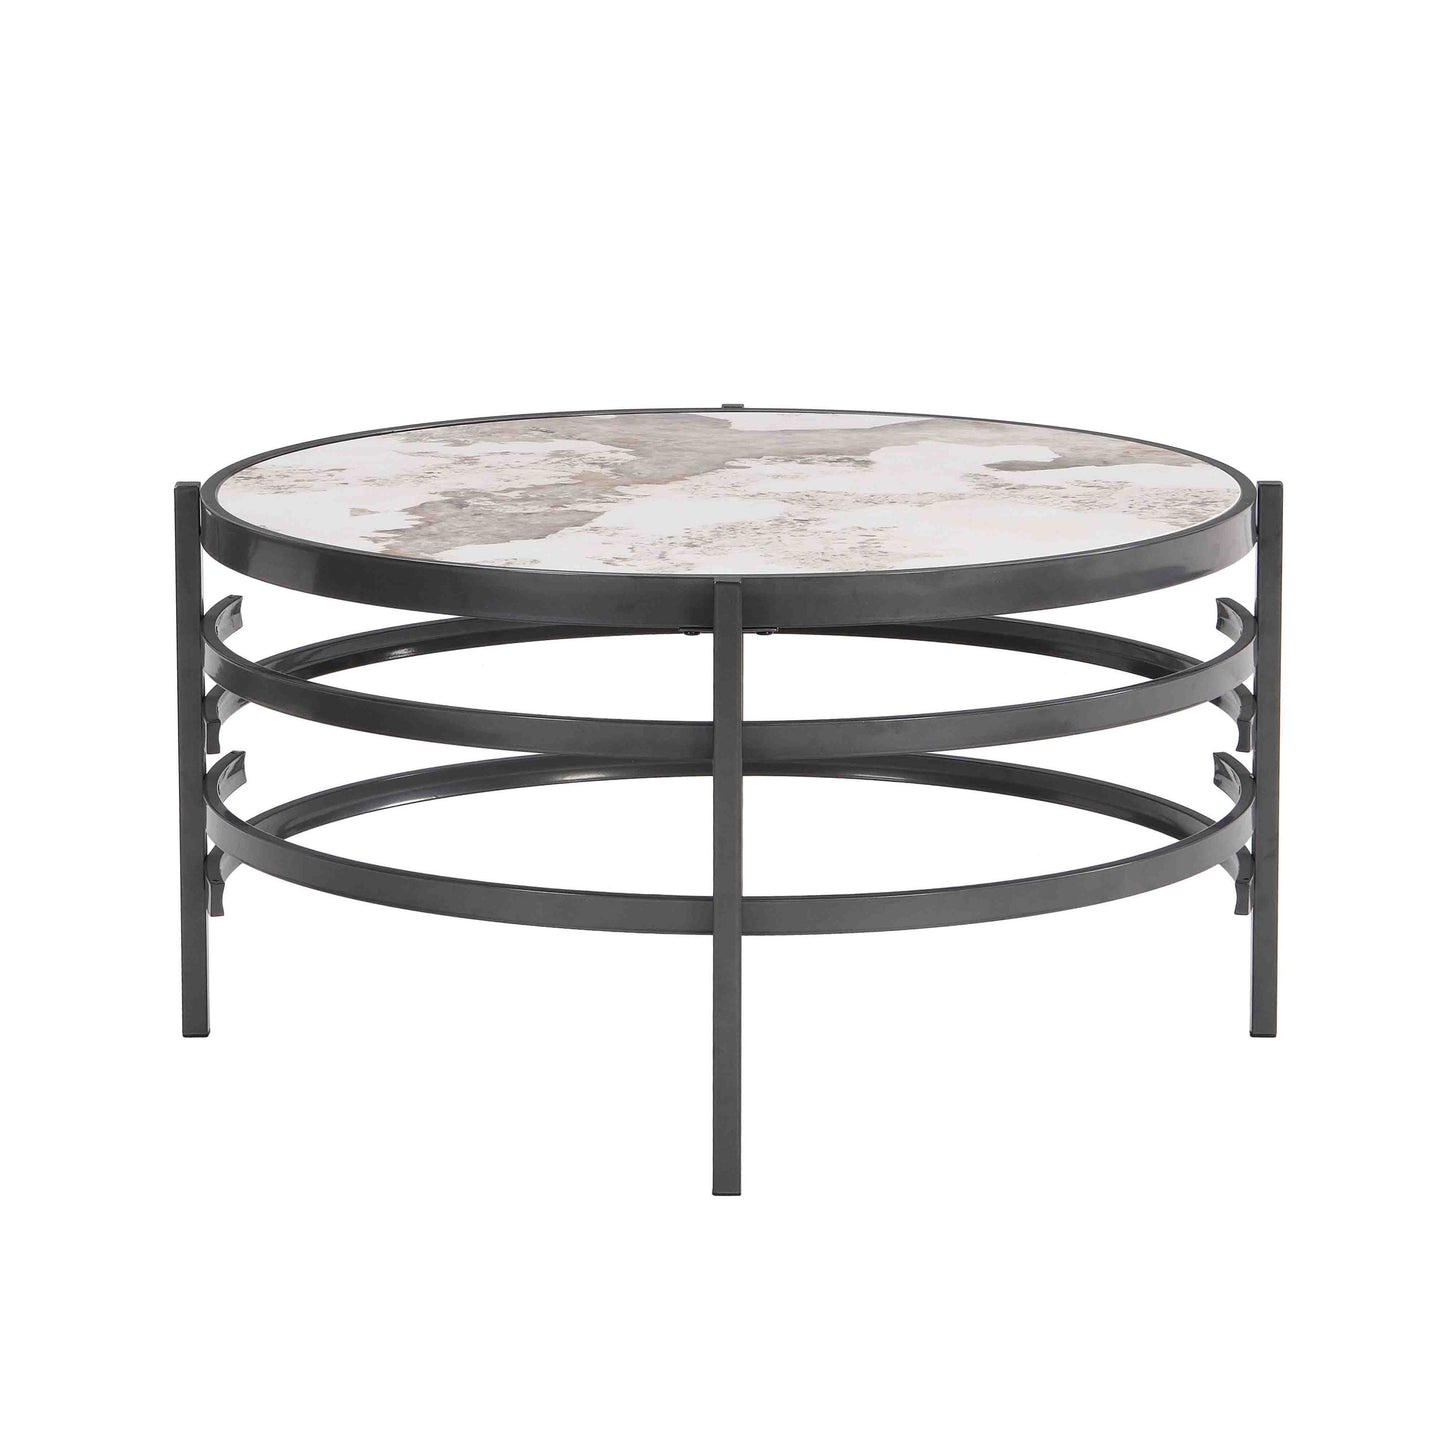 32.48'' Round  Coffee Table With Sintered Stone Top&Sturdy Metal Frame, Modern Coffee Table for Living Room, Darker Gray - Enova Luxe Home Store